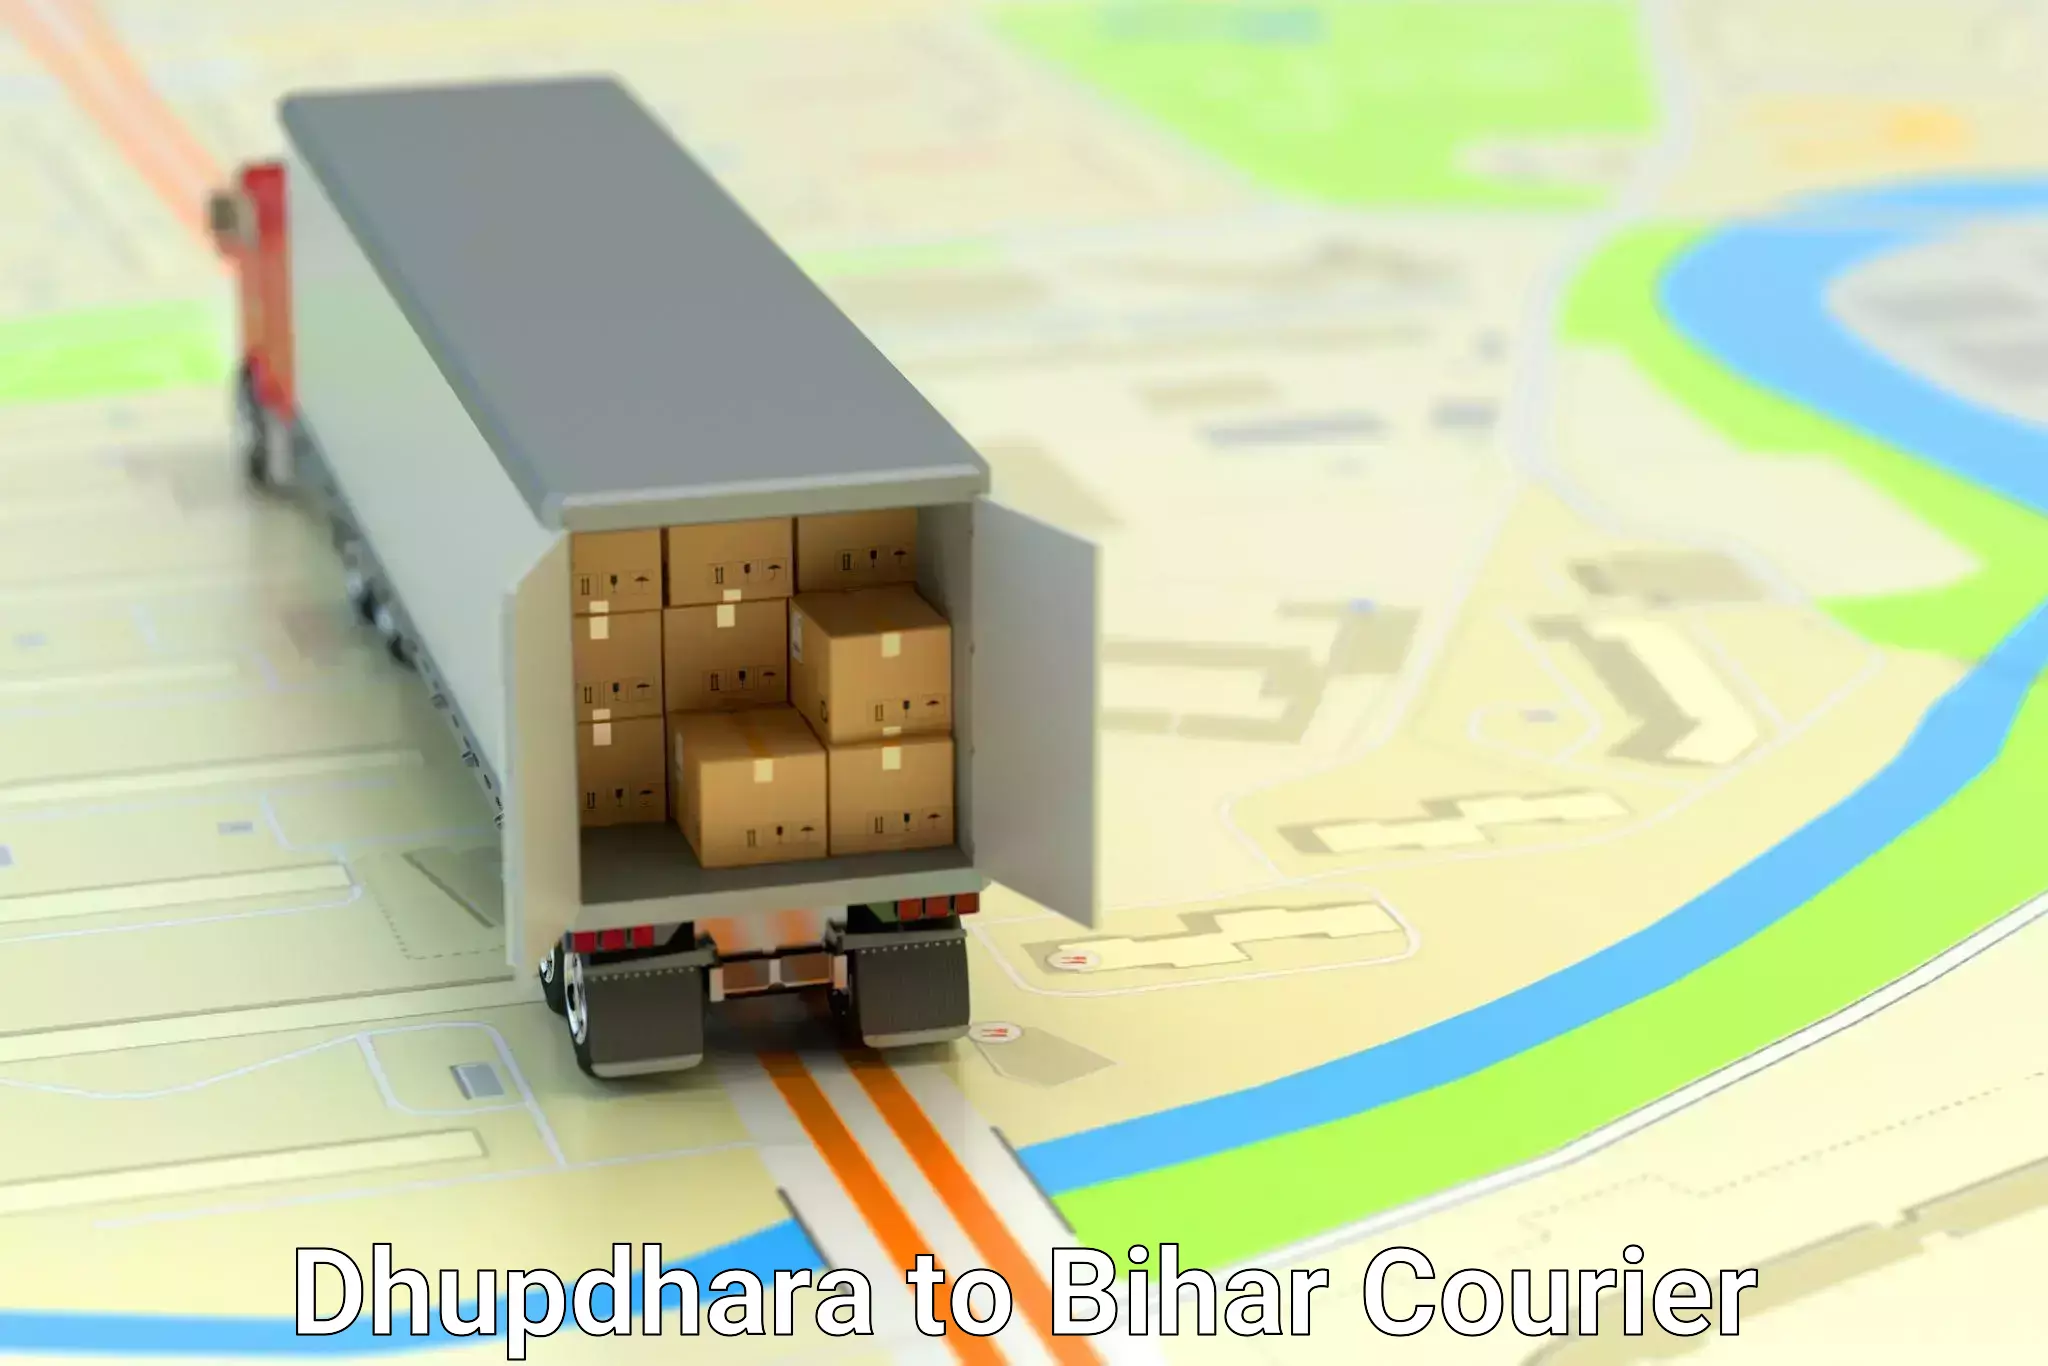 Multi-national courier services Dhupdhara to Bihar